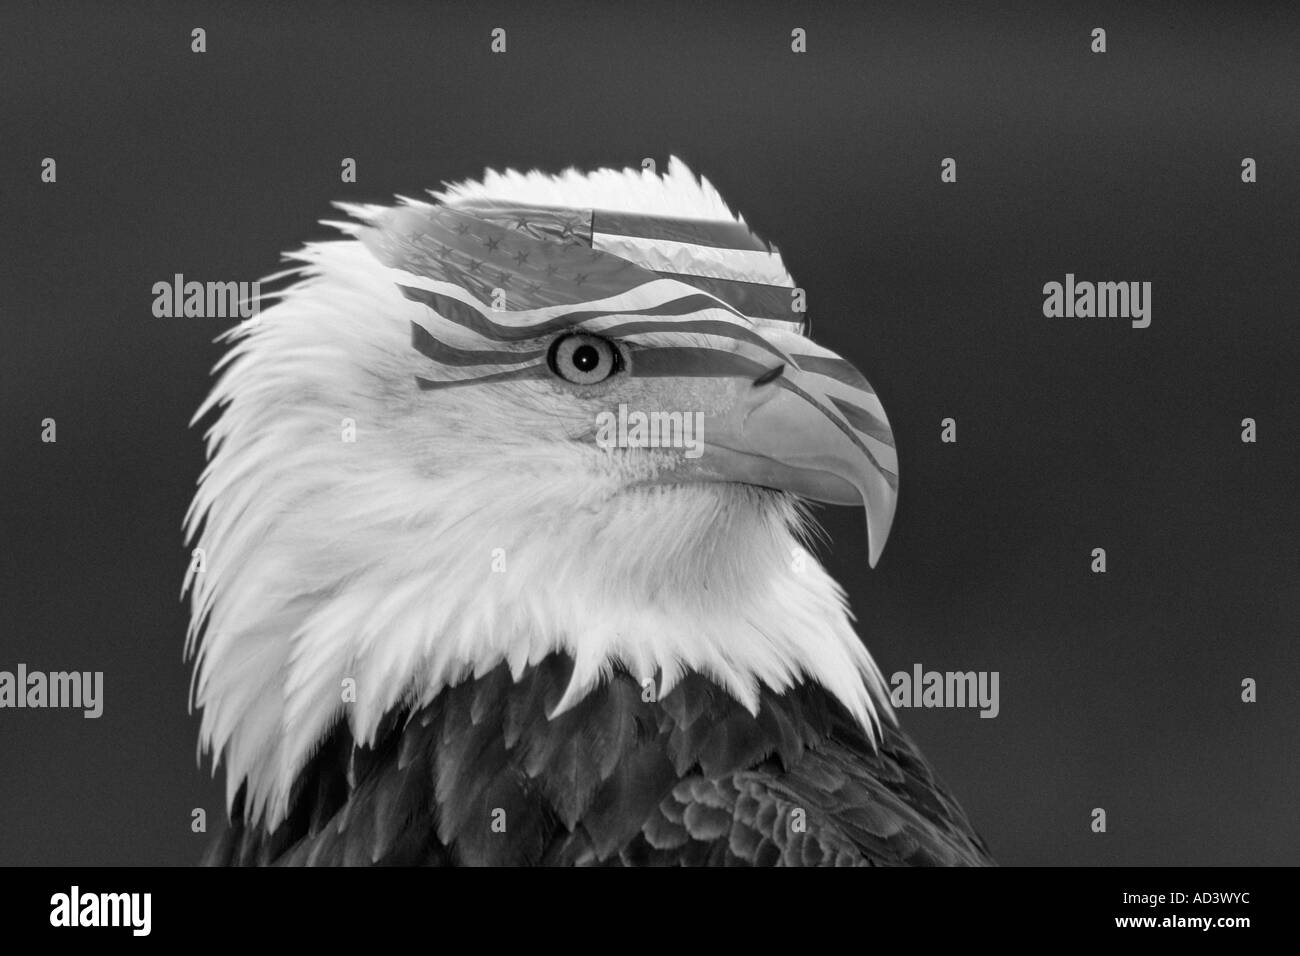 Closeup portrait of bald eagle and American Flag-Note-Digital effects applied to image. Captive subject. Stock Photo